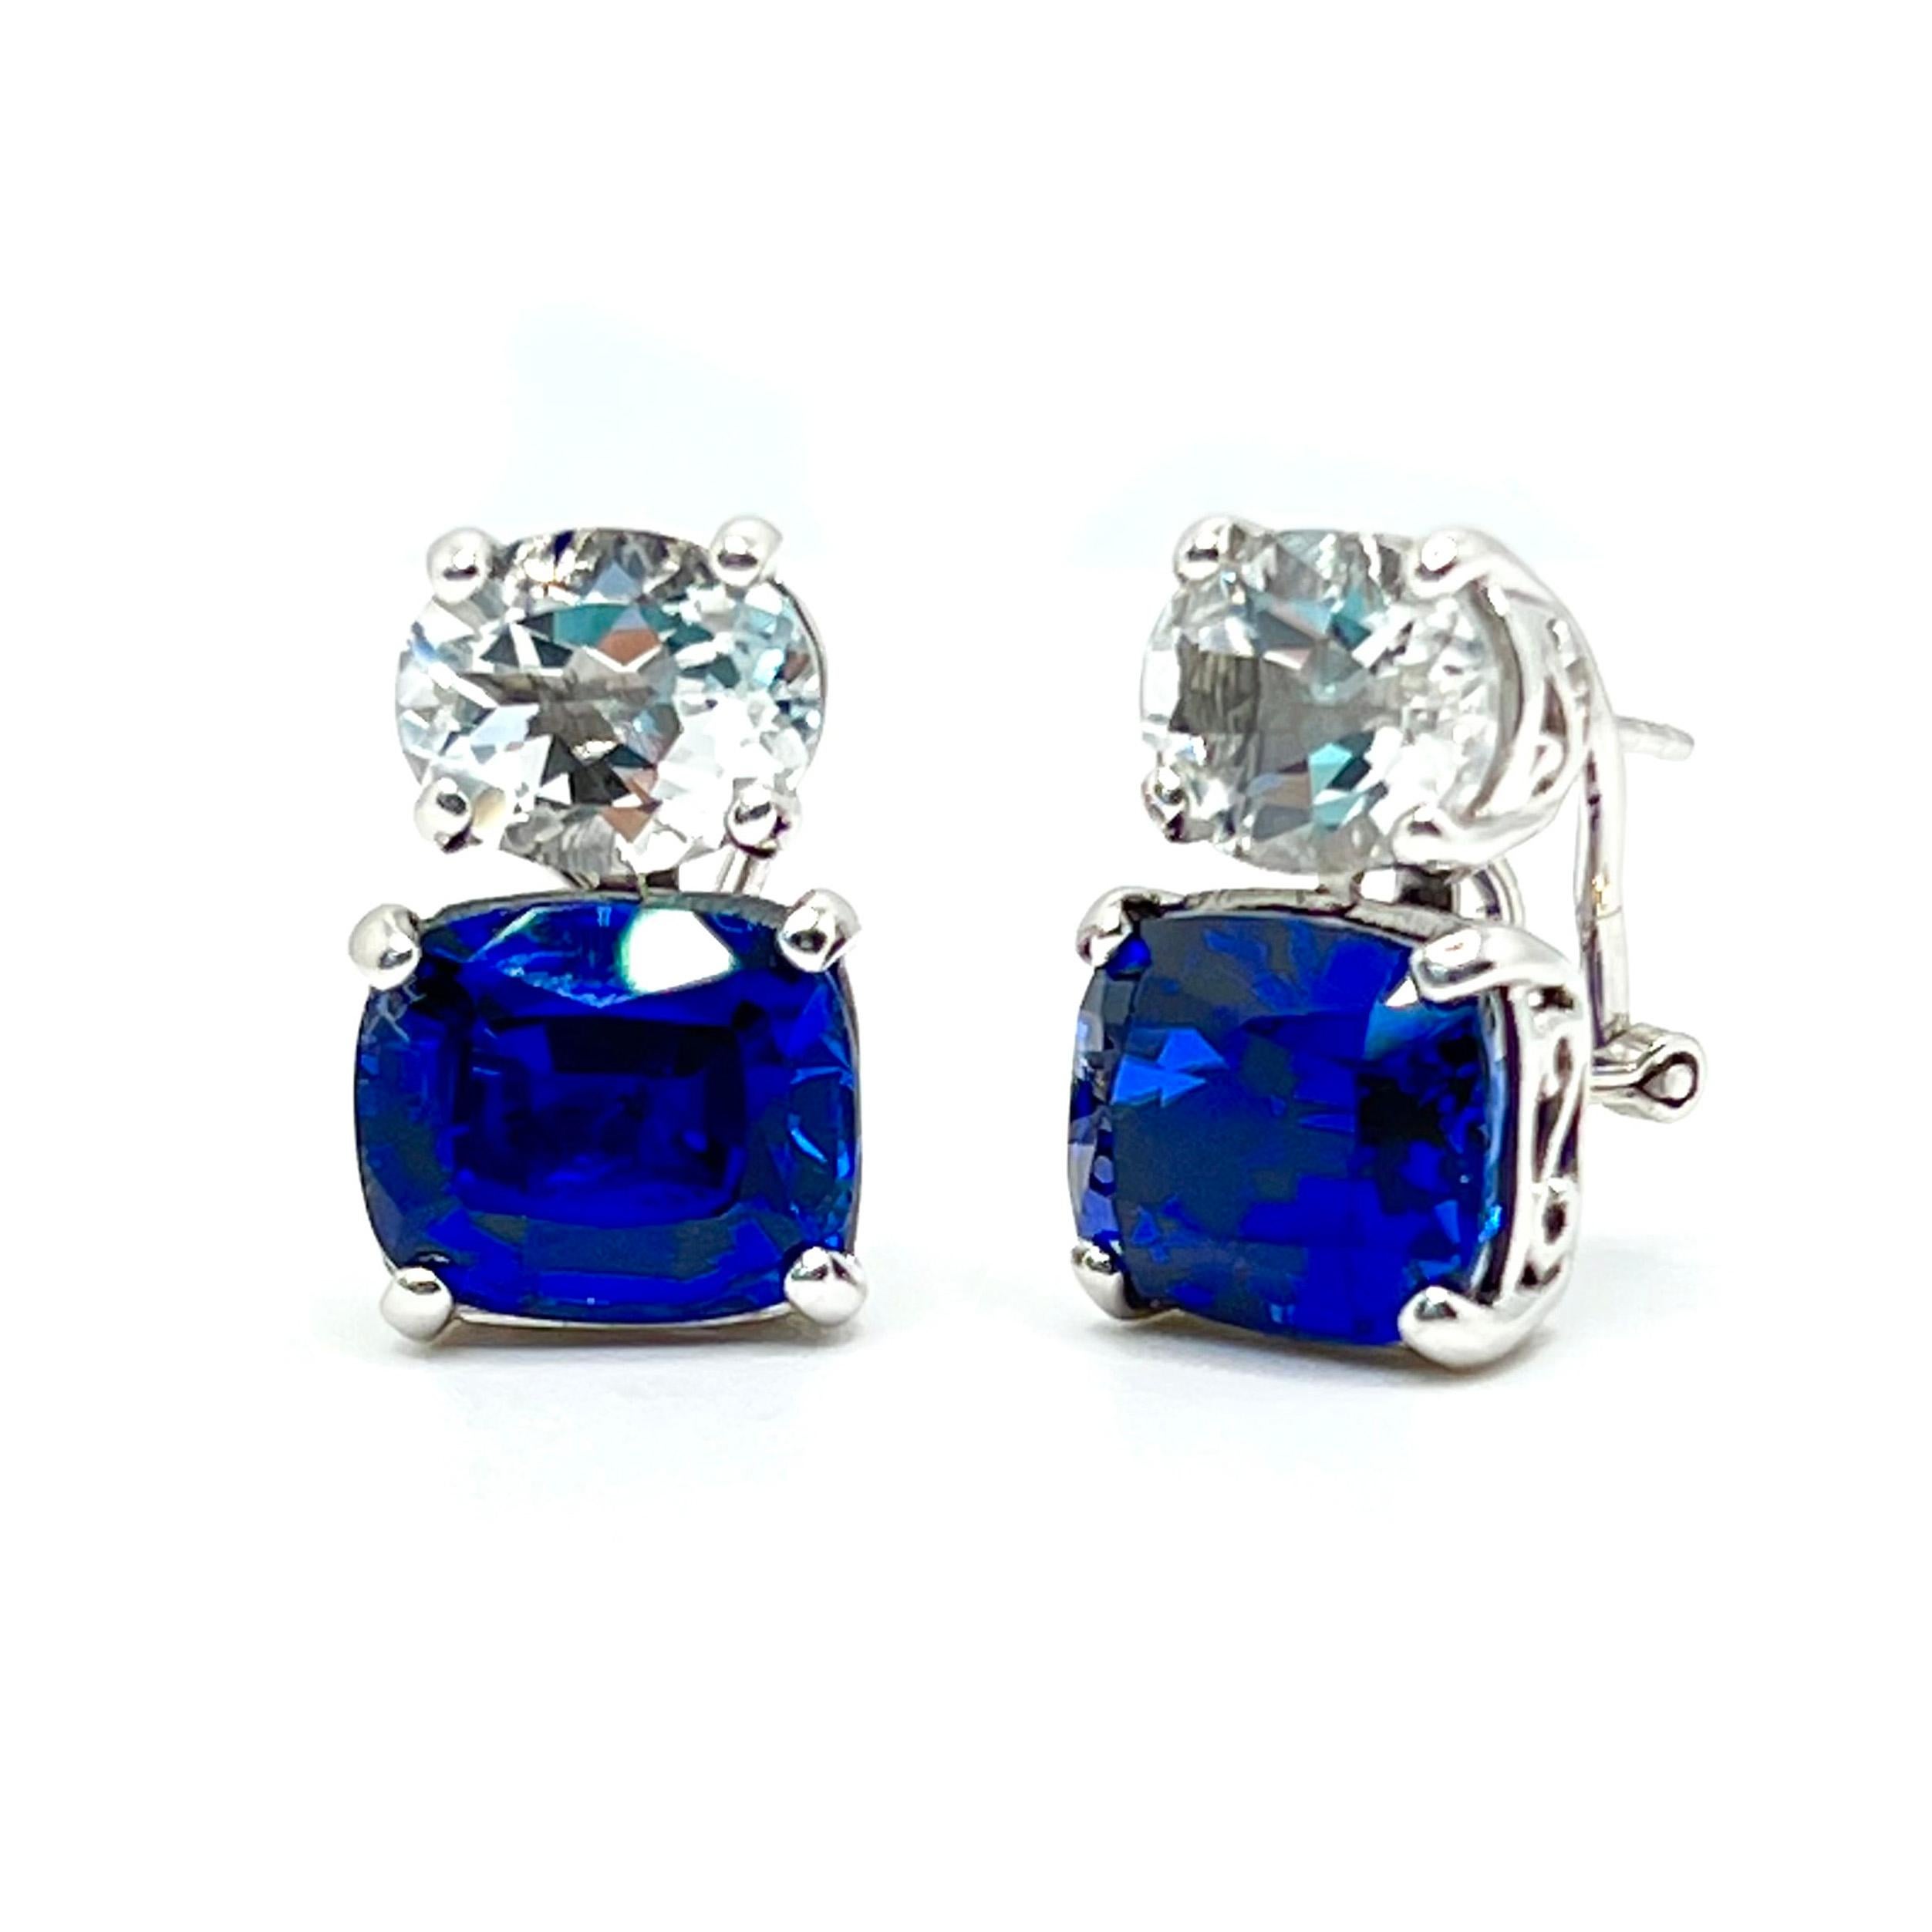 Stunning Oval White Topaz and Cushion-cut Lab Sapphire Earrings

These stunning pair of earrings features a pair of oval white topaz with cushion-cut lab-created blue sapphire, handset in platinum rhodium plated sterling silver.  Straight post with